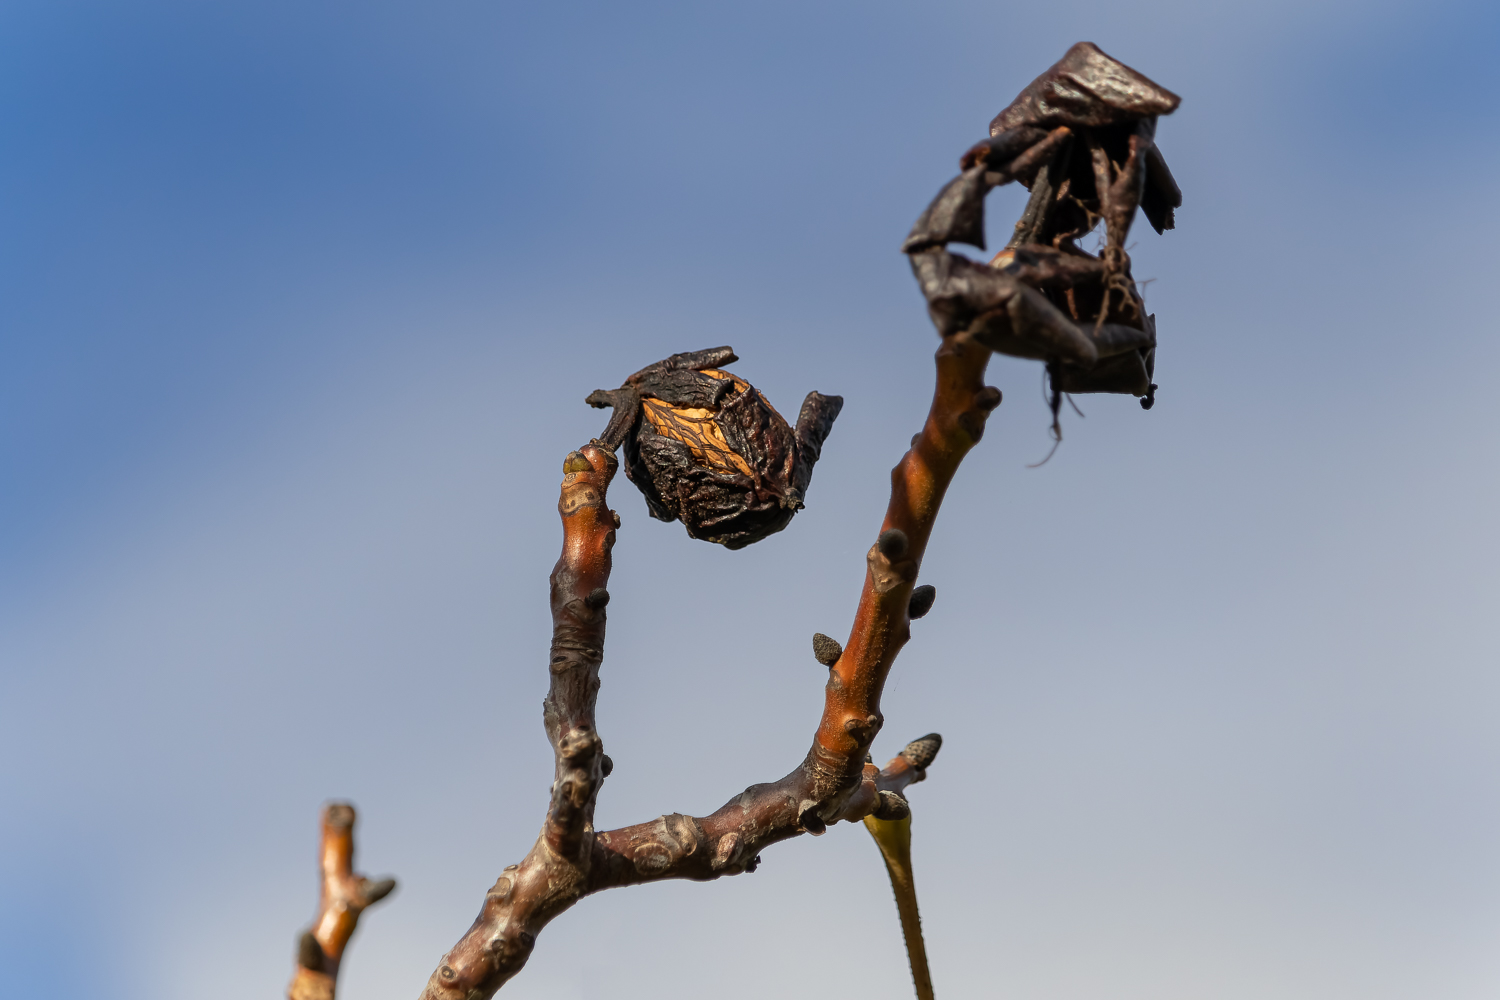 A walnut on a bare tree branch against a blue sky